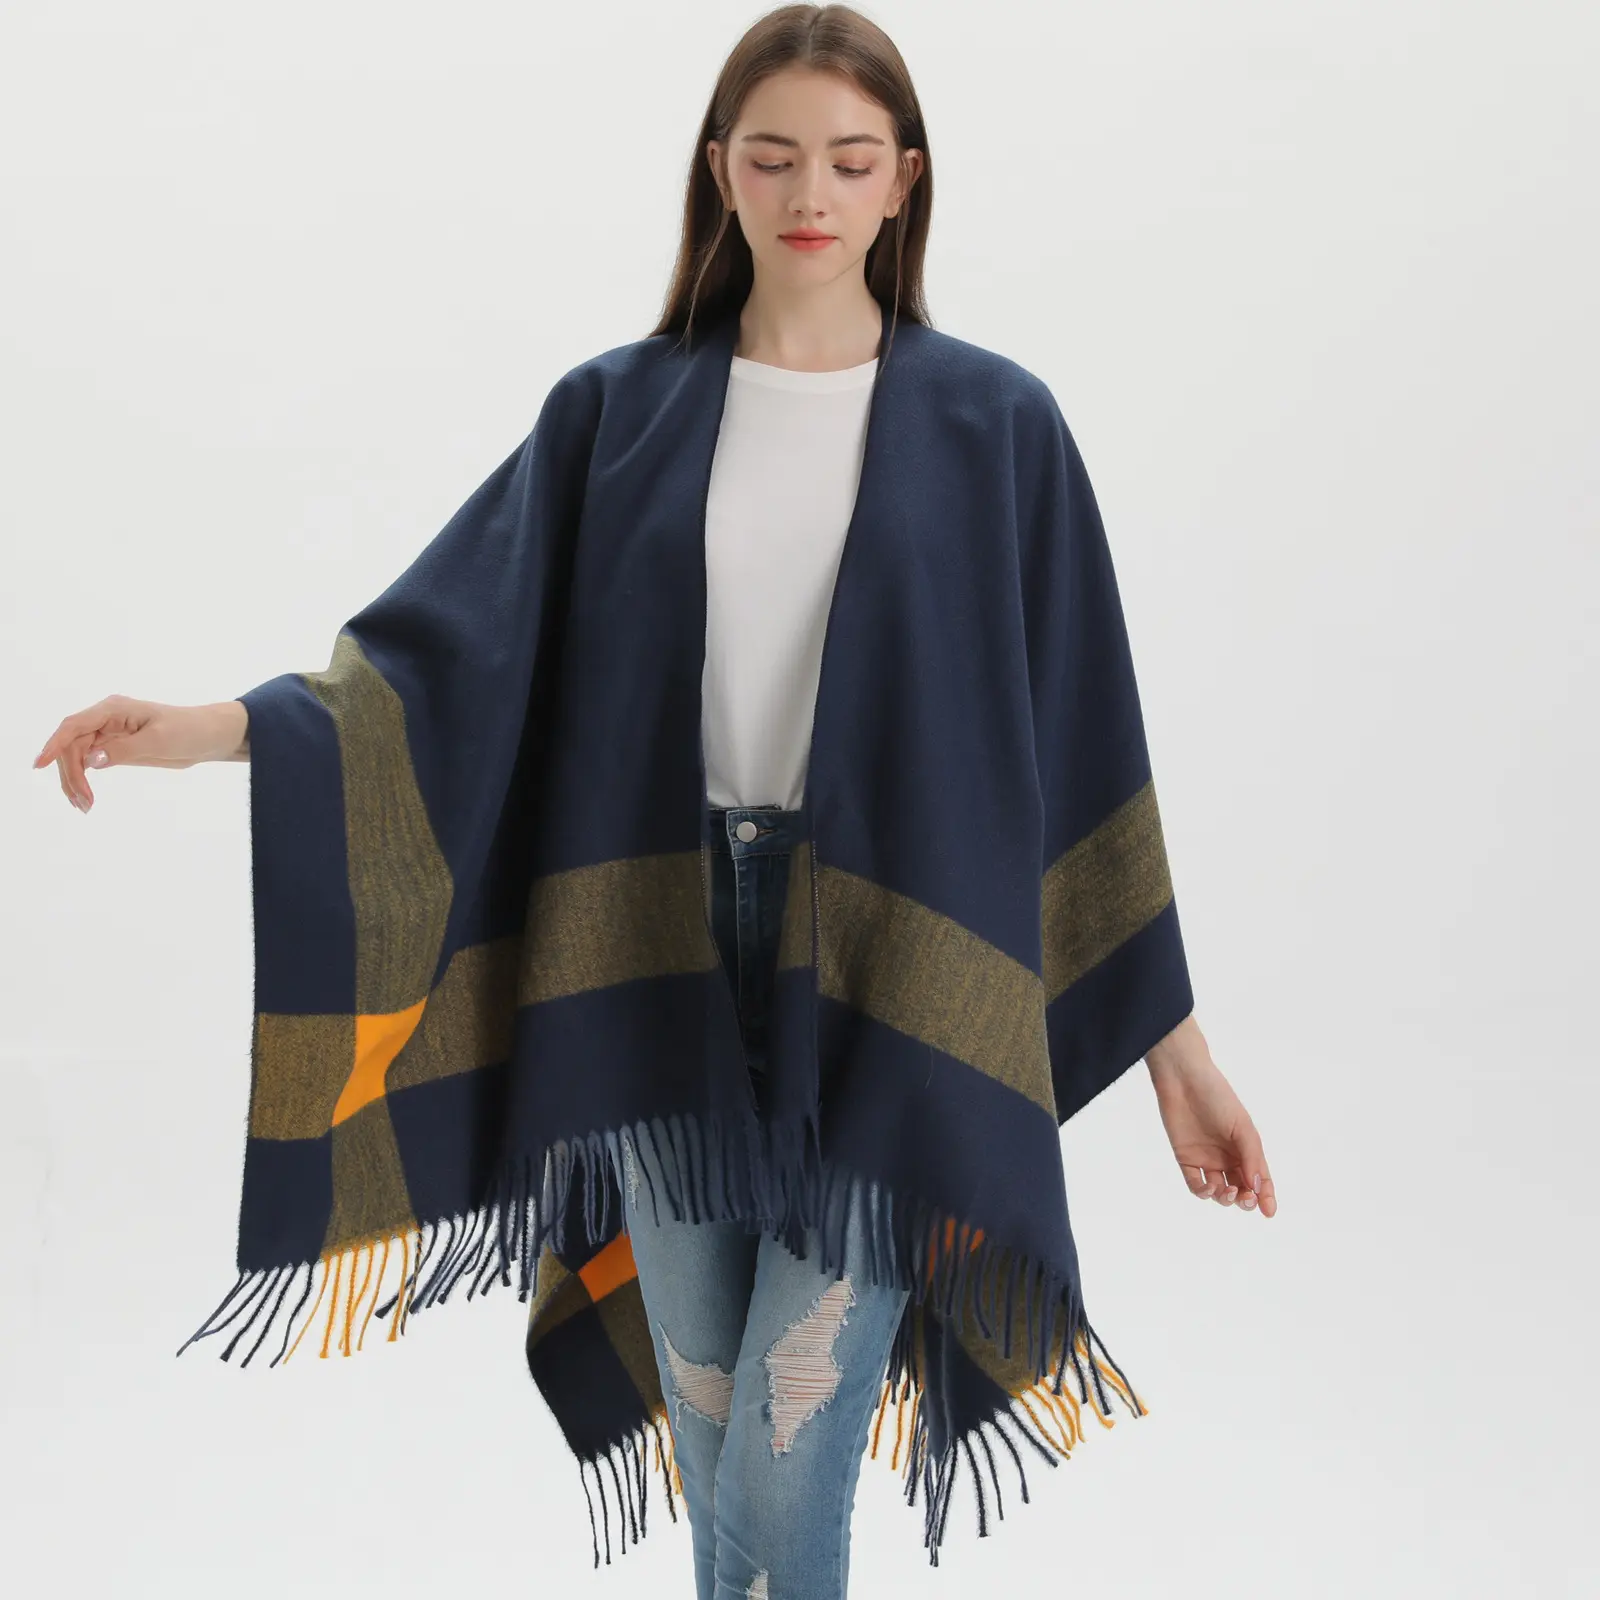 Winter Solid Color Thick Warm Cashmere Wraps Plain Ponchos For Women Female Acrylic Blanket Scarf With Tassels Capes Shawls